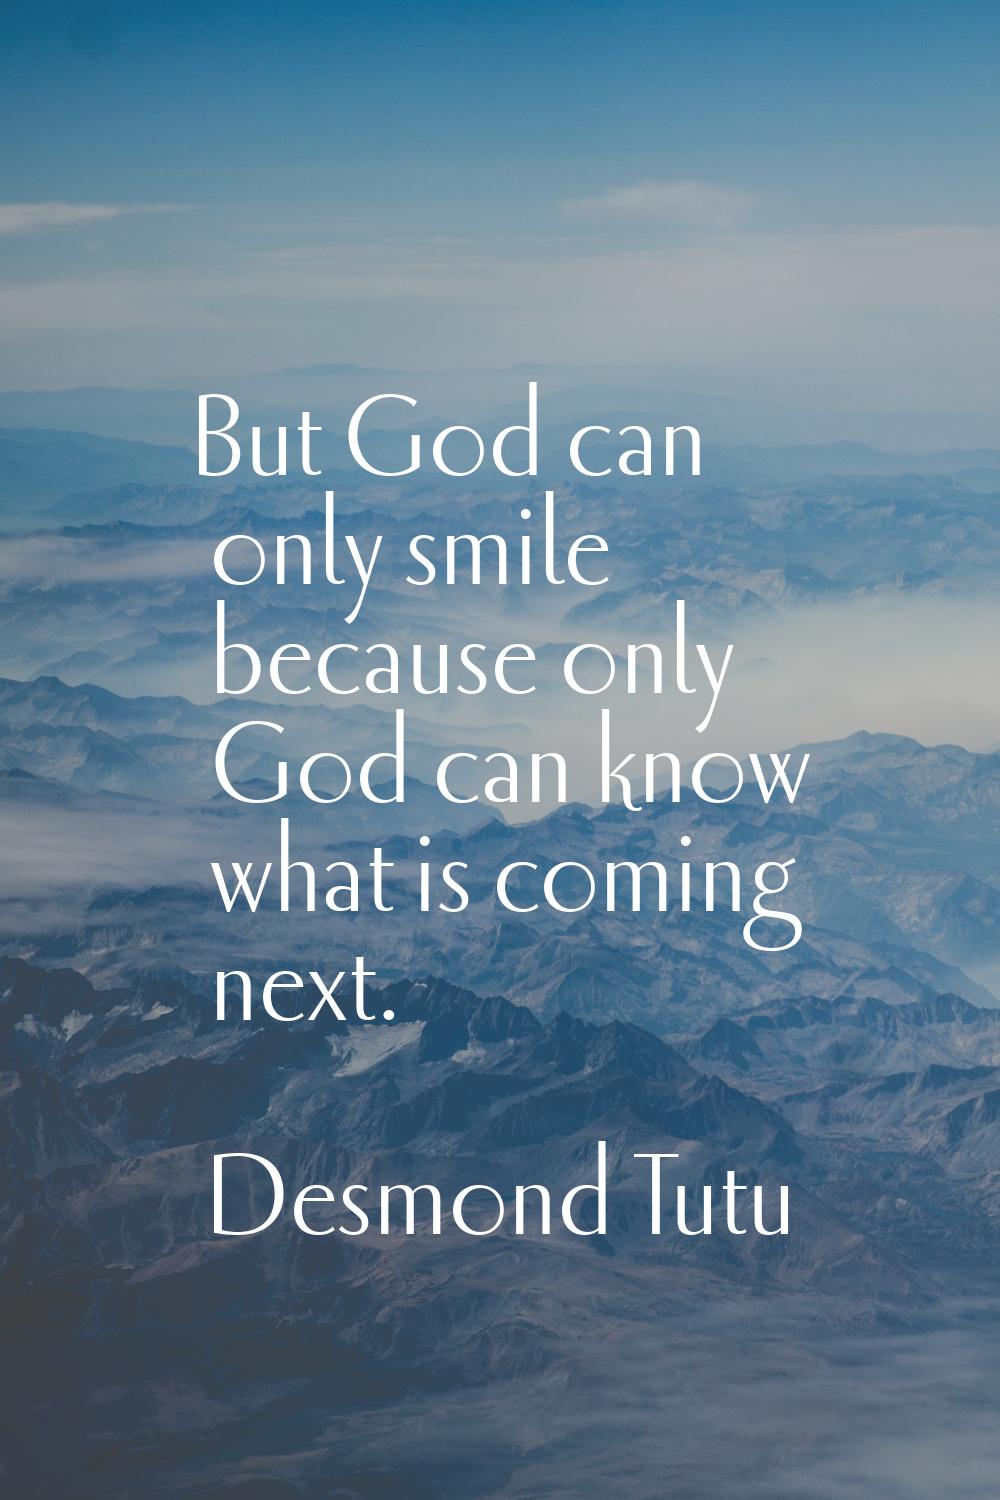 But God can only smile because only God can know what is coming next.